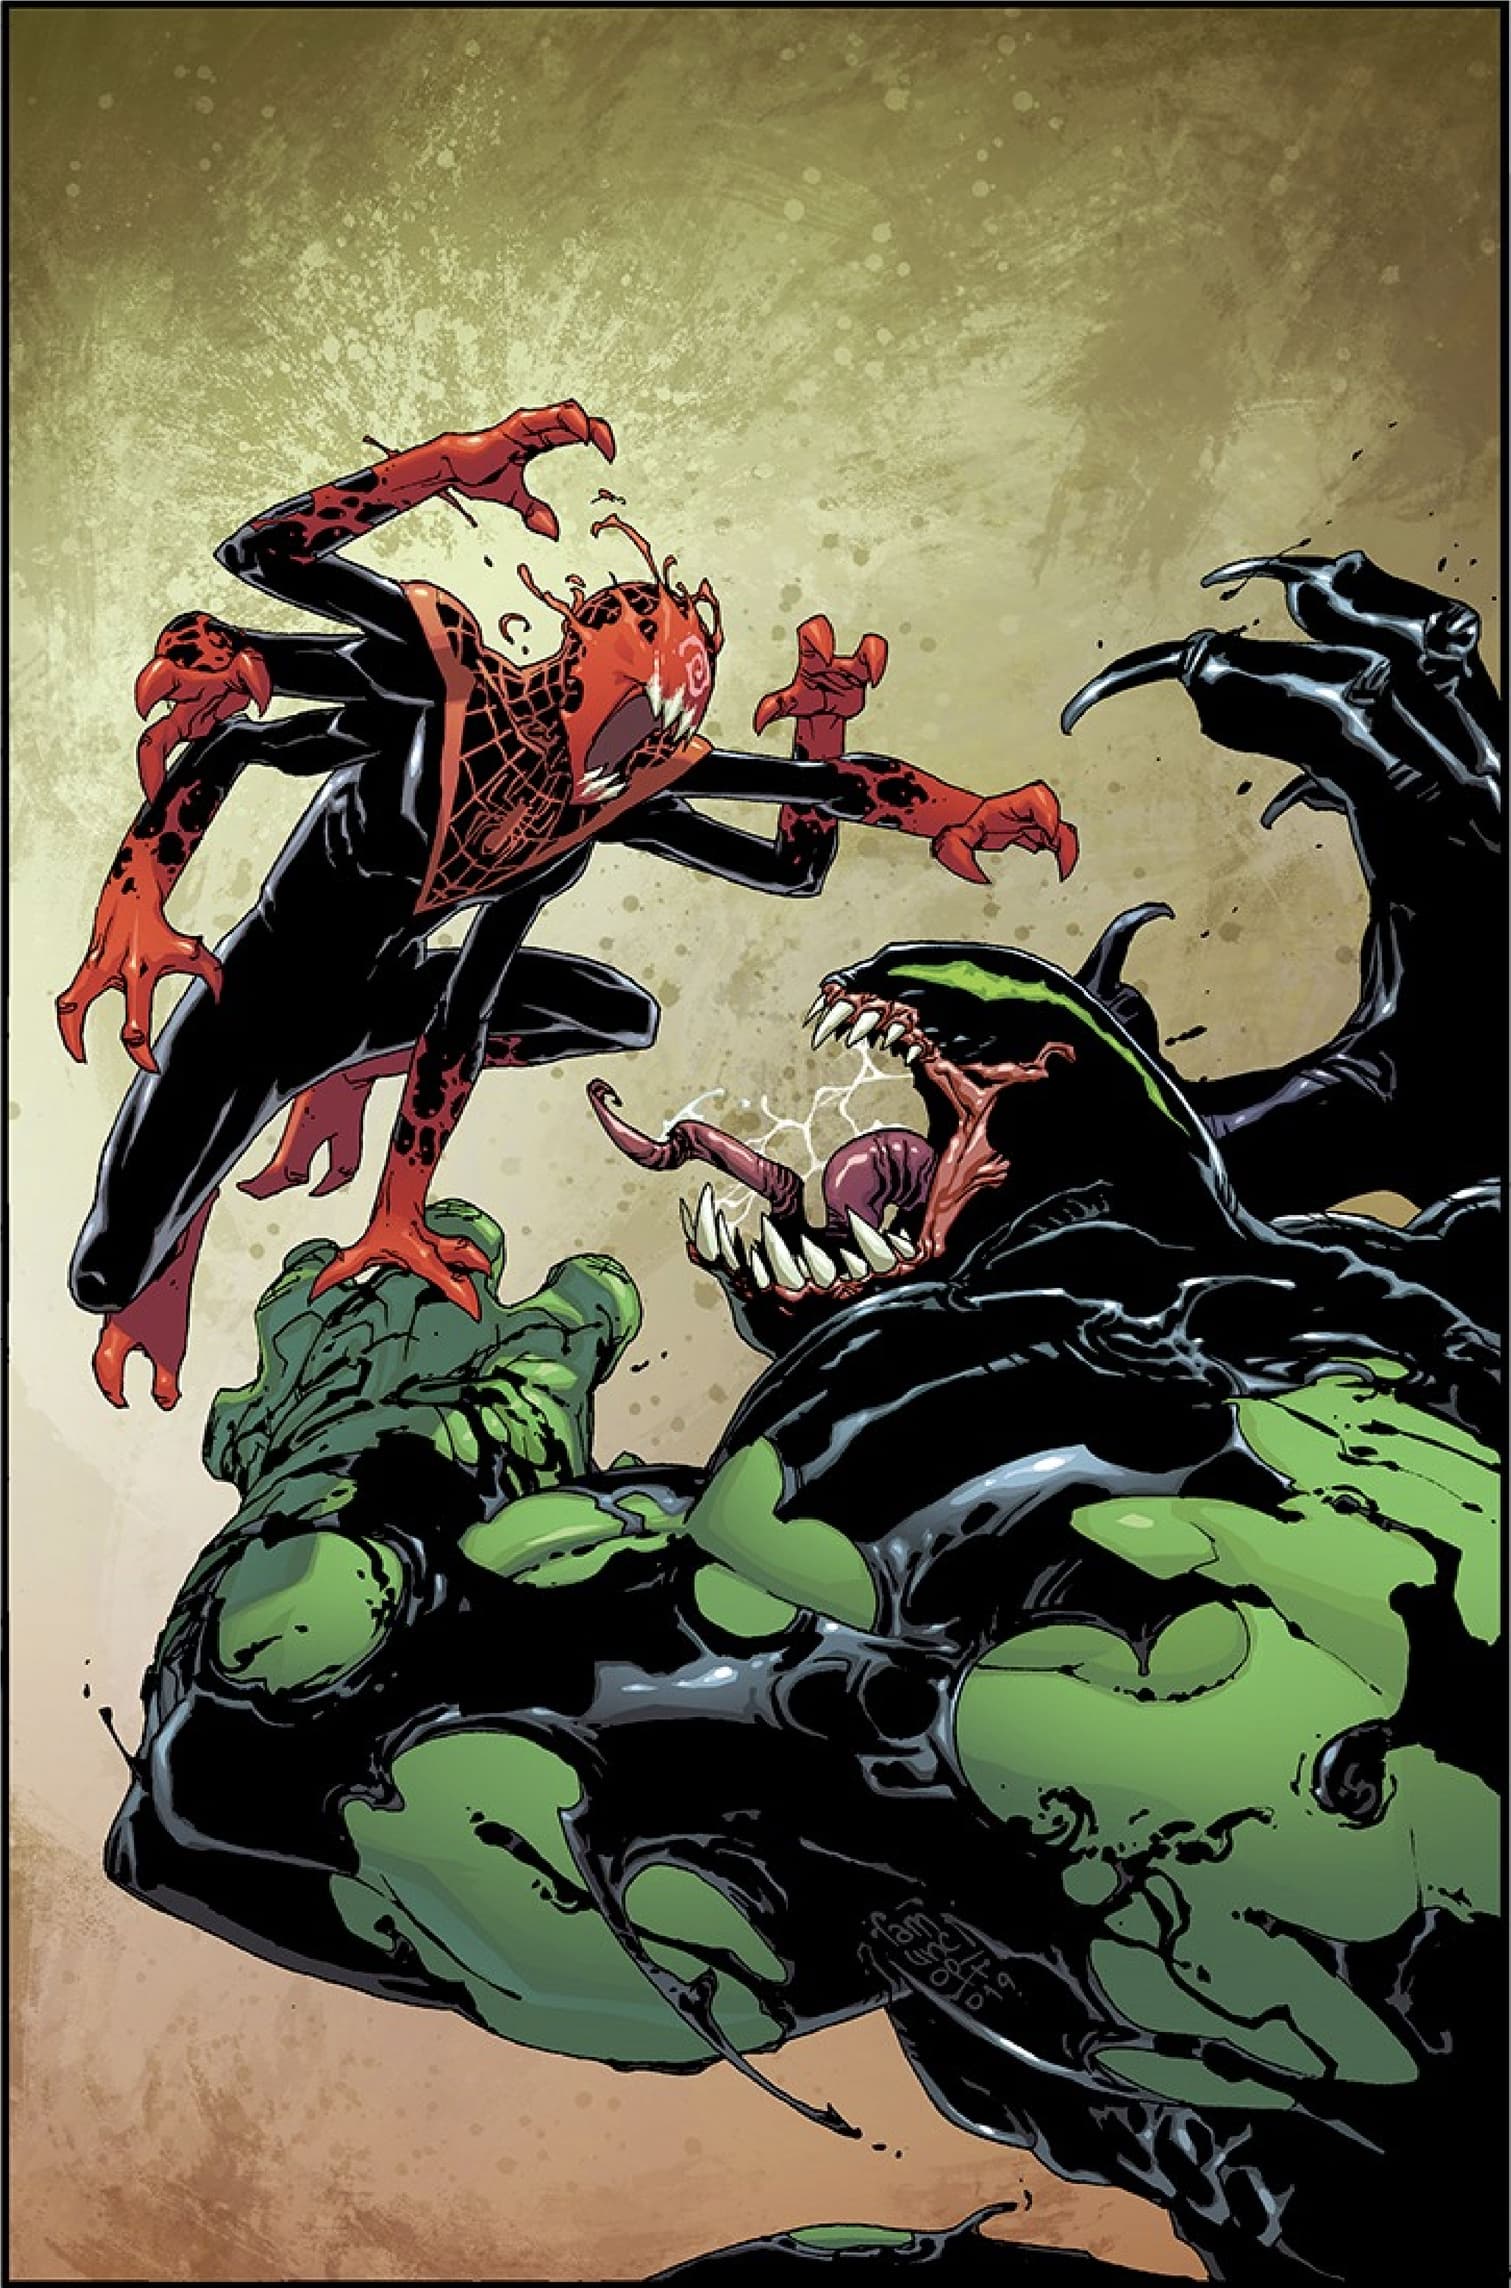 ABSOLUTE CARNAGE: MILES MORALES #2